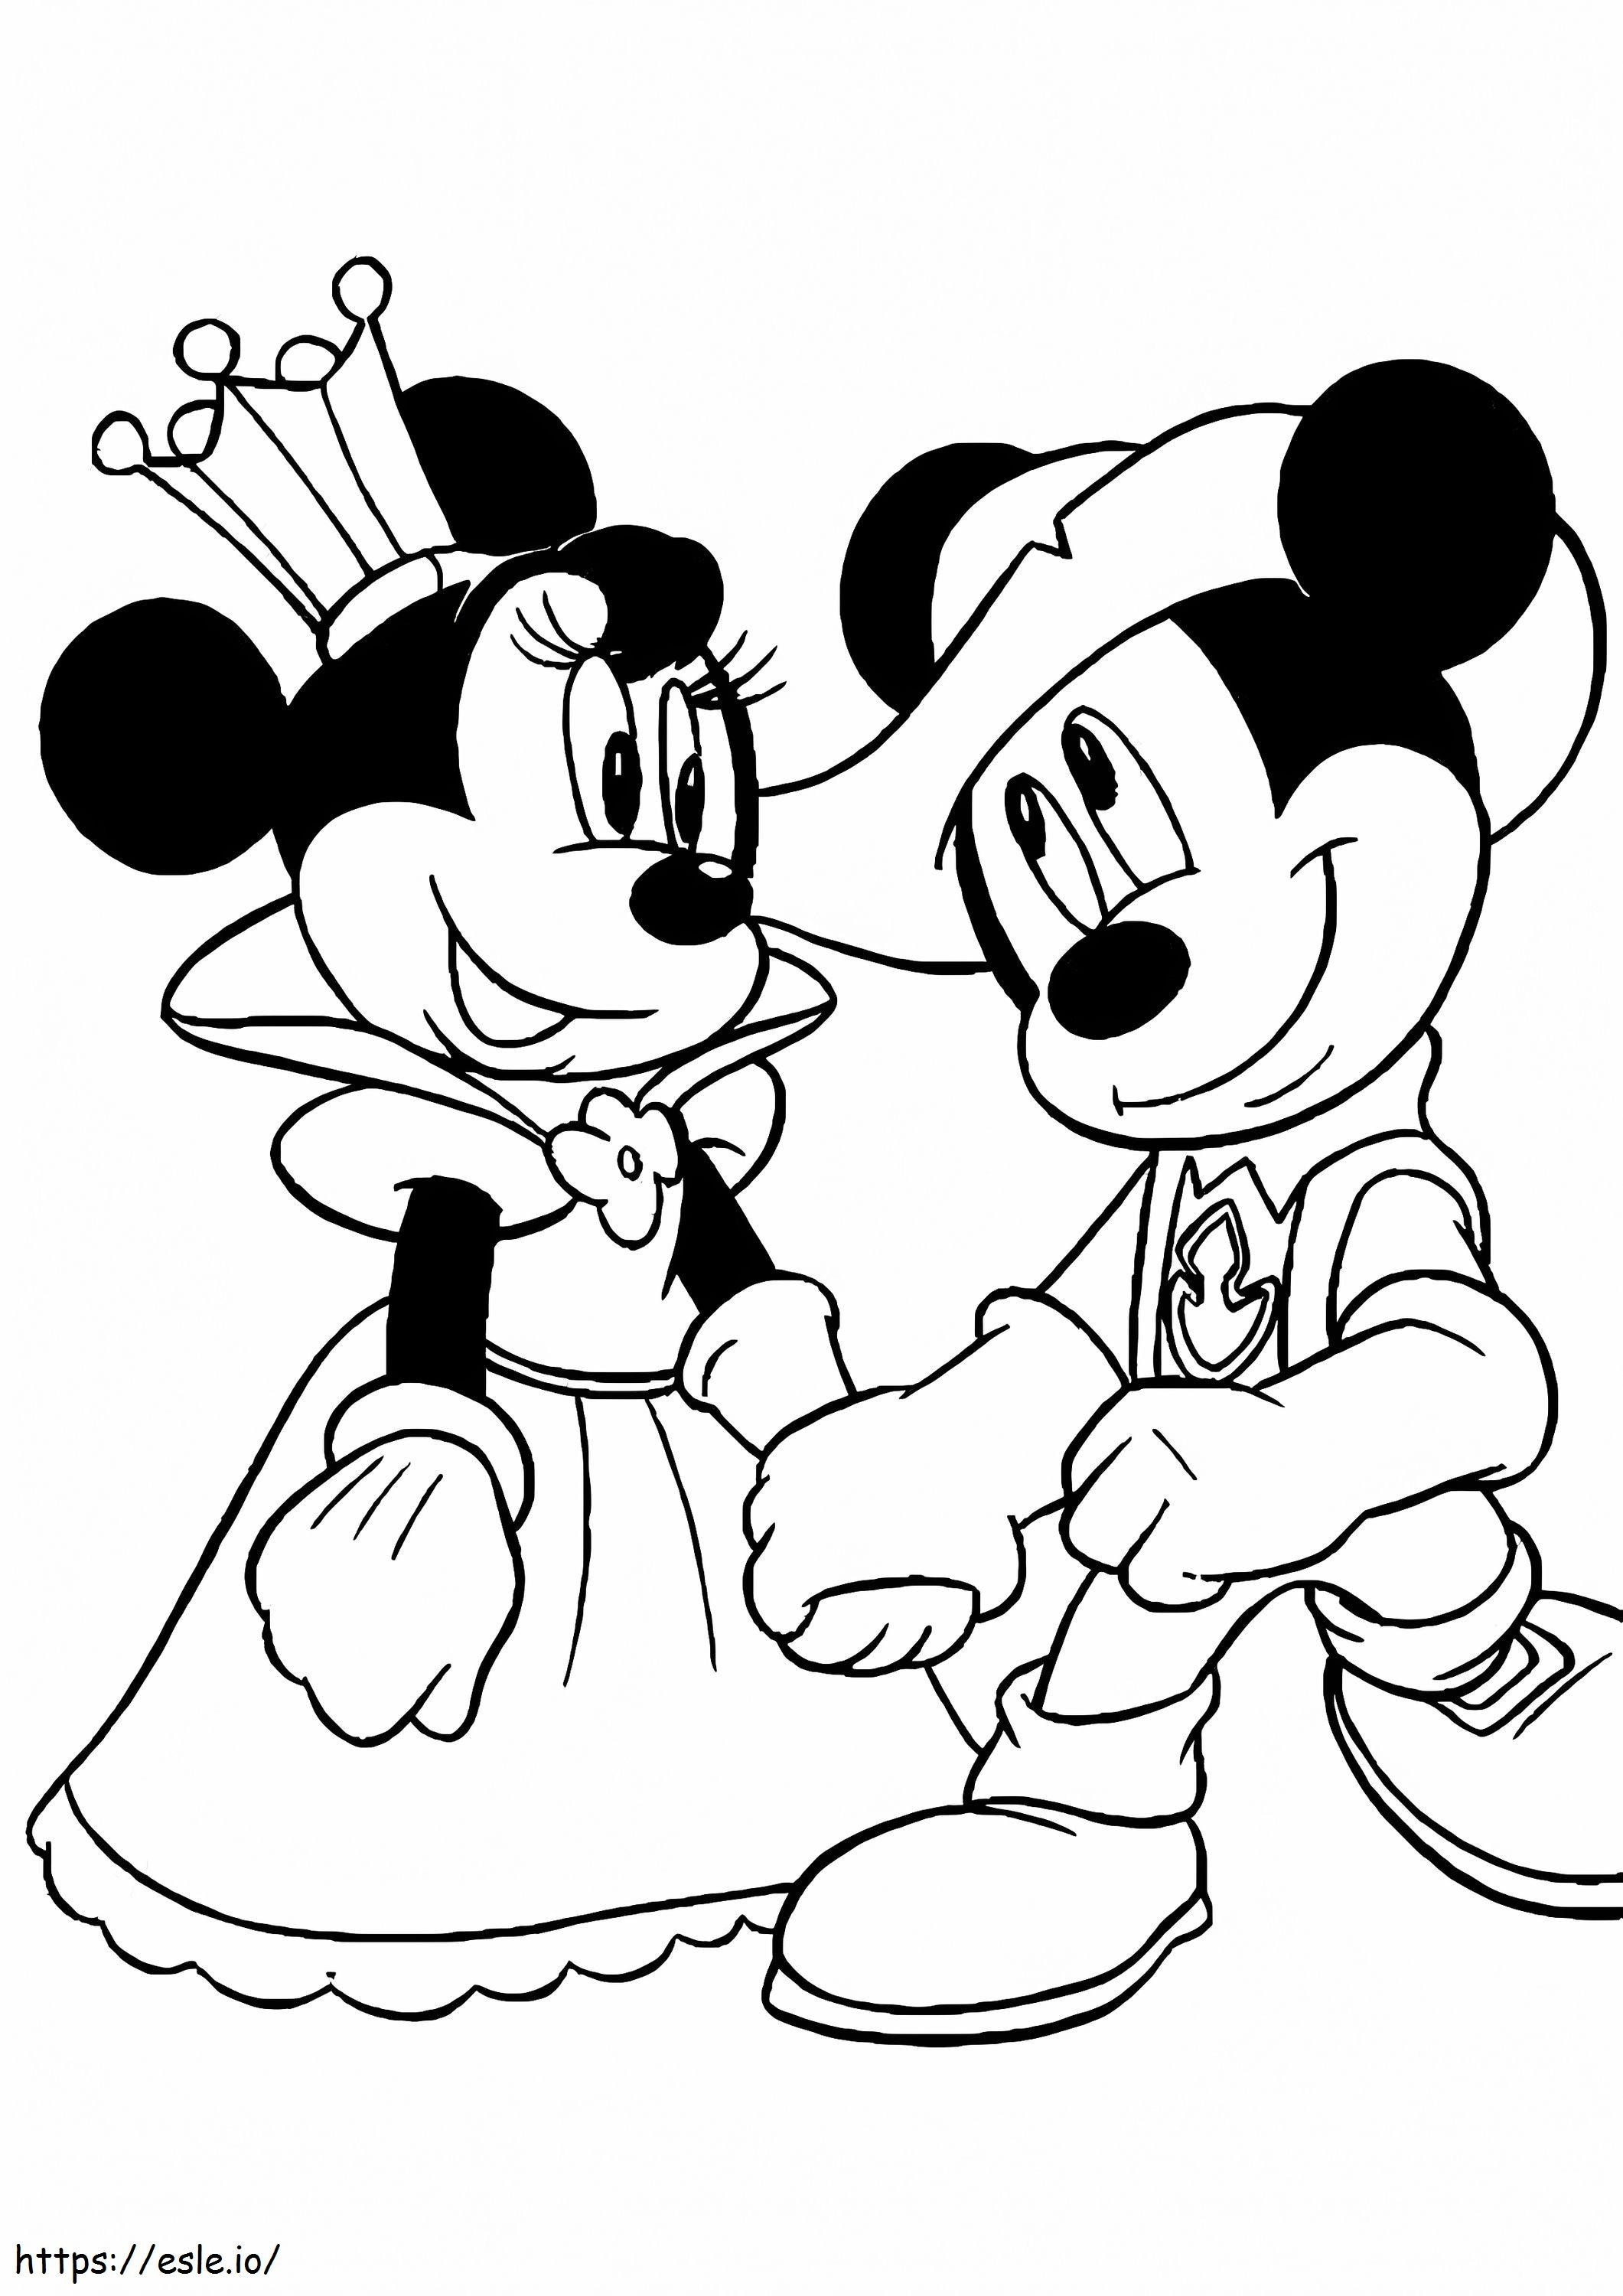 Queen Minnie Mouse And Knight Mickey Mouse coloring page